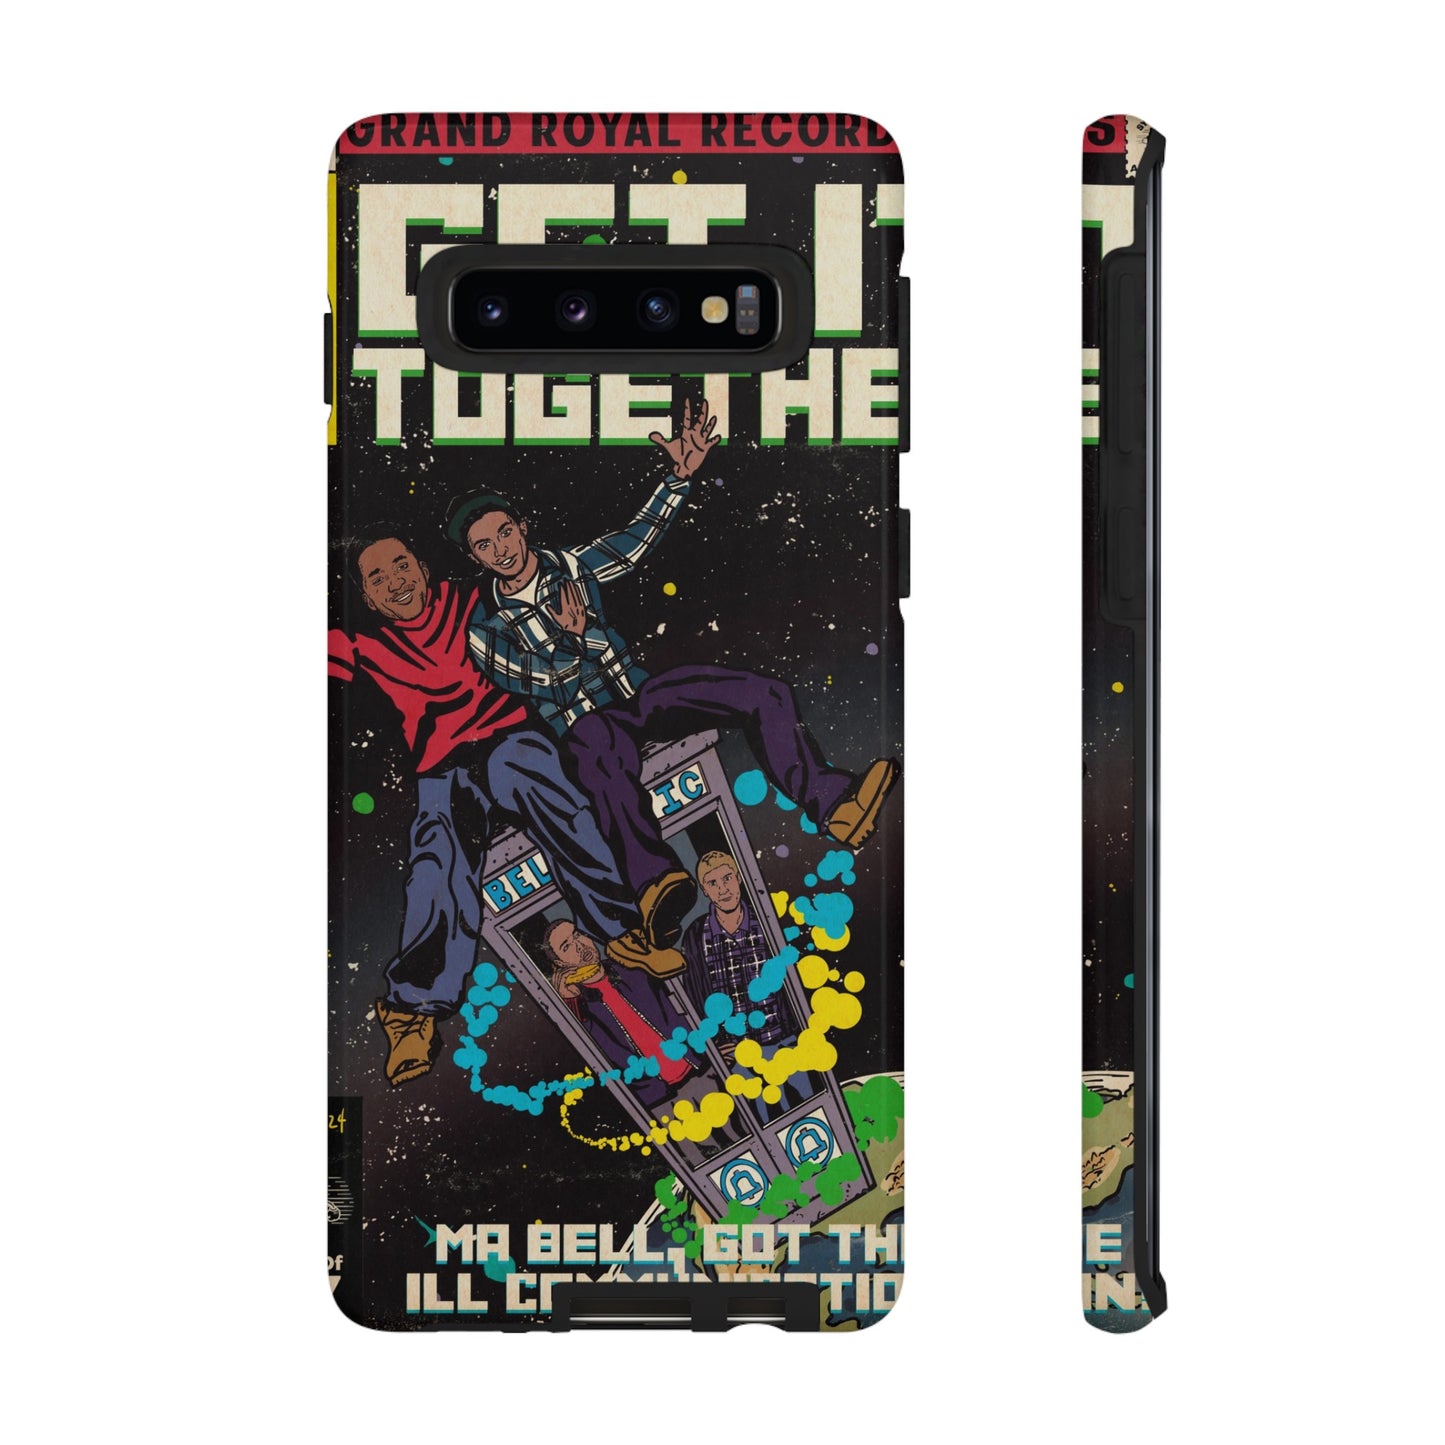 Beastie Boys & Q-Tip - Get it Together - Tough Phone Cases